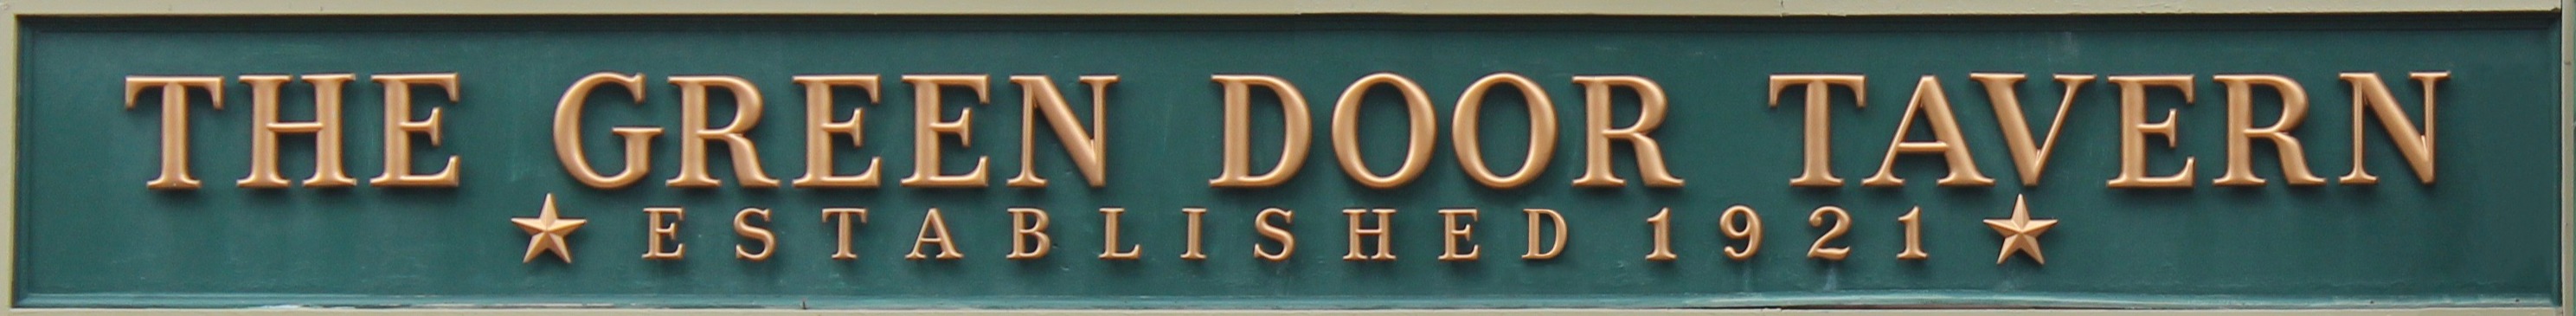 a sign on the side of a building